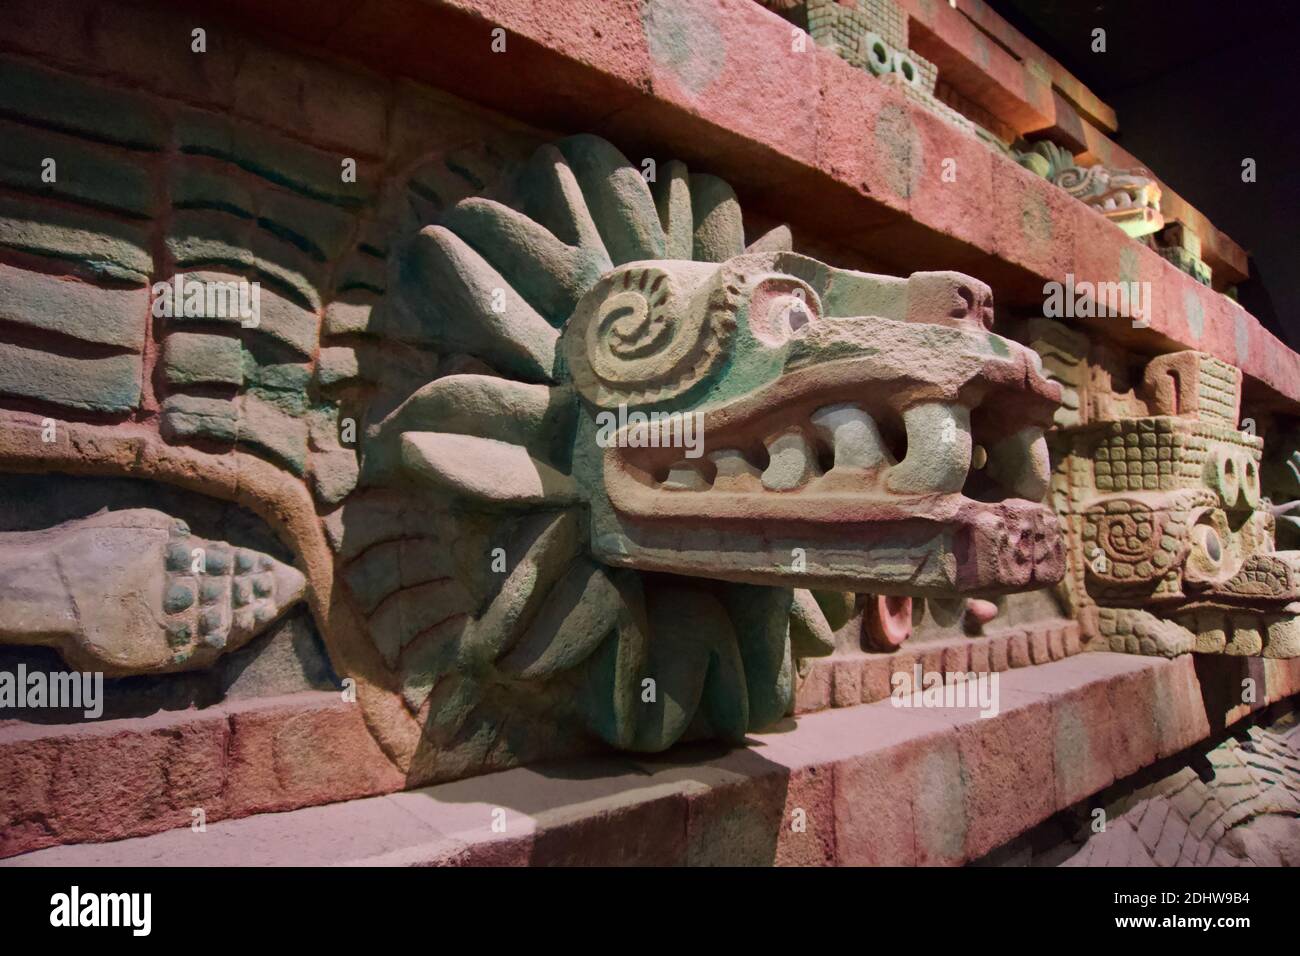 Serpent head on replica of Teotihuacan emple at the National Museum of Anthropology (Museo Nacional de Antropologia, MNA). Mexico City, Mexico. Stock Photo